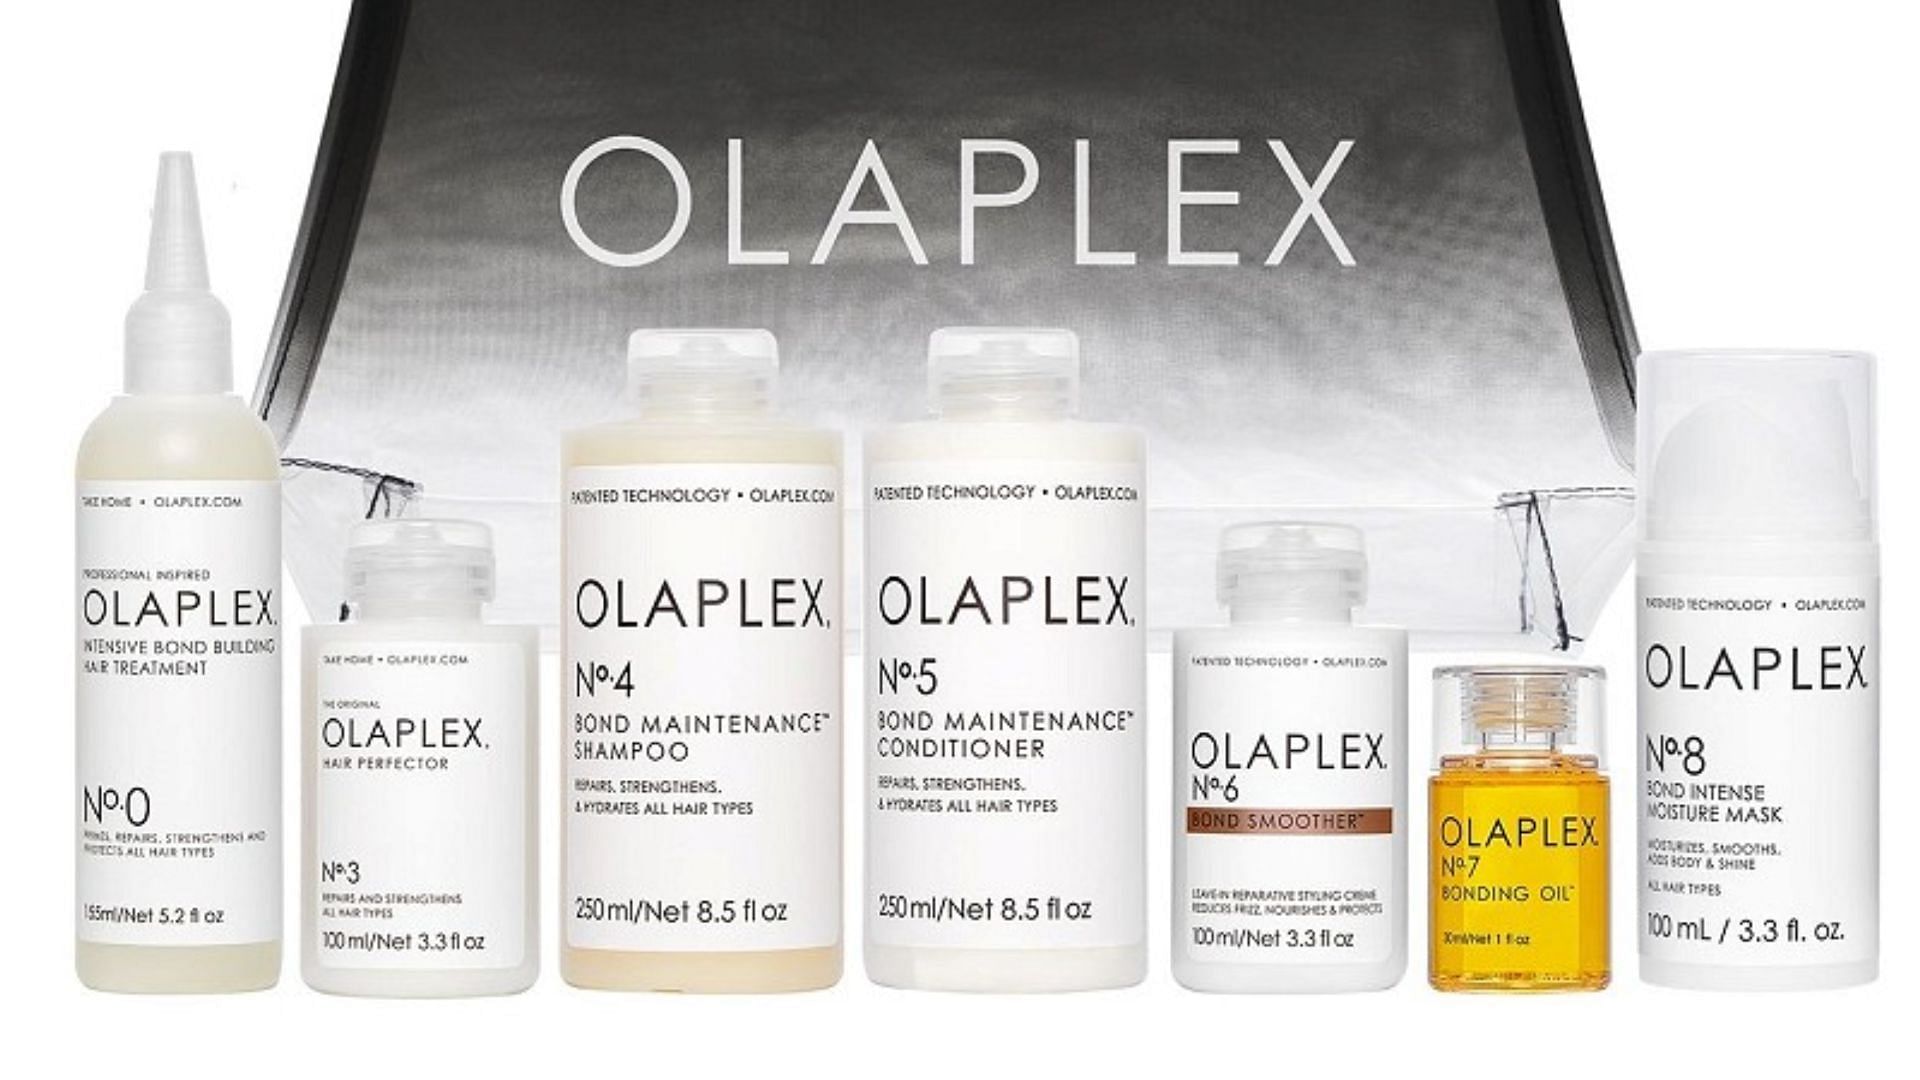 Olaxplex is one of the best-selling hair care brands in both the United States and the United Kingdom (Image via Olāplex)